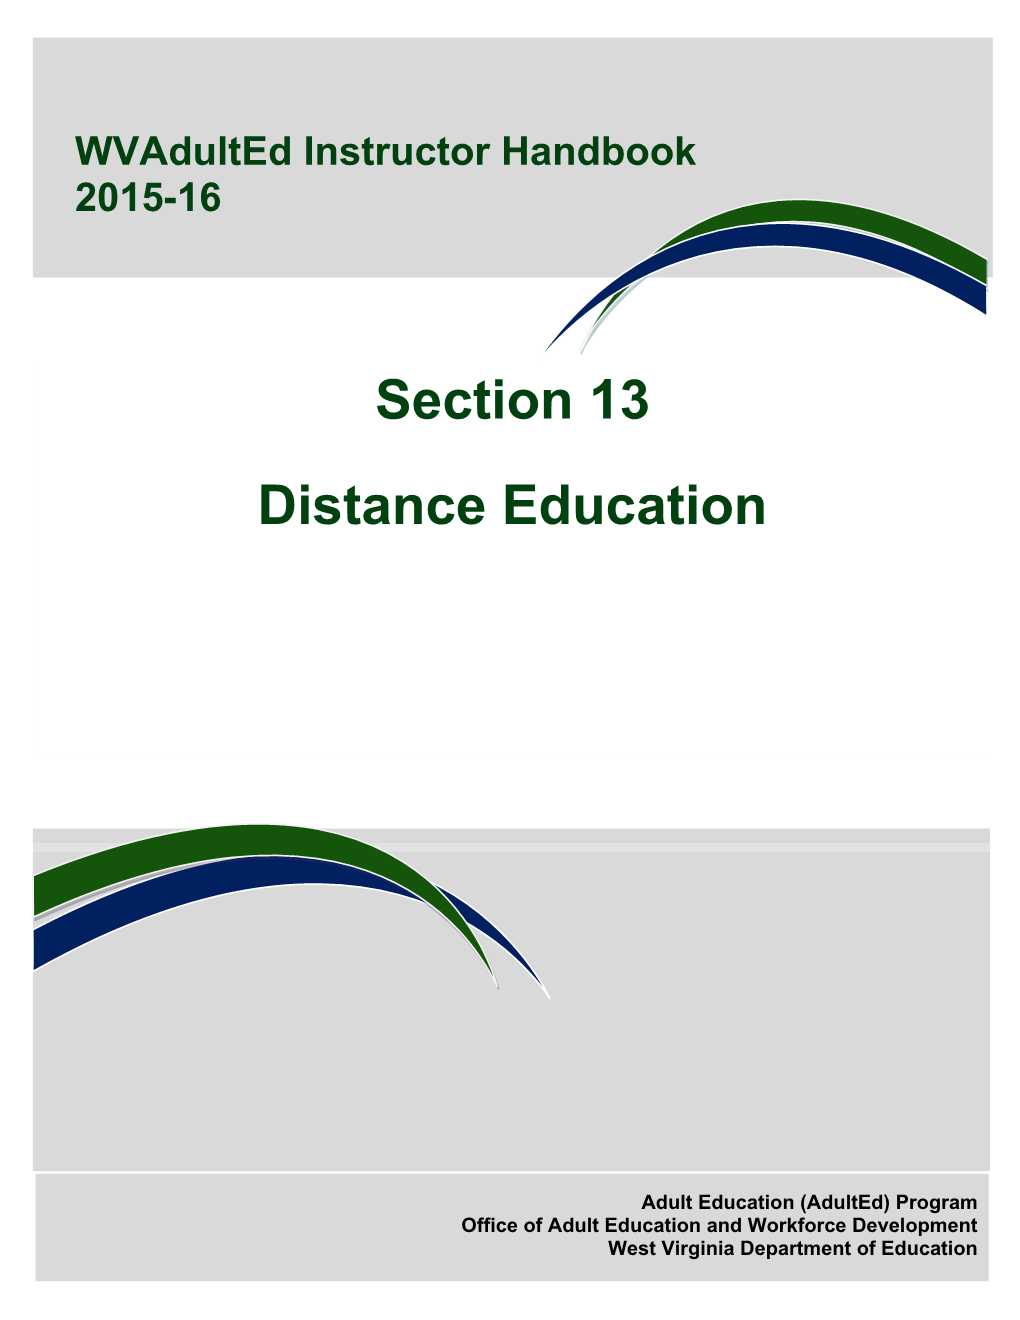 Distance Education Defined